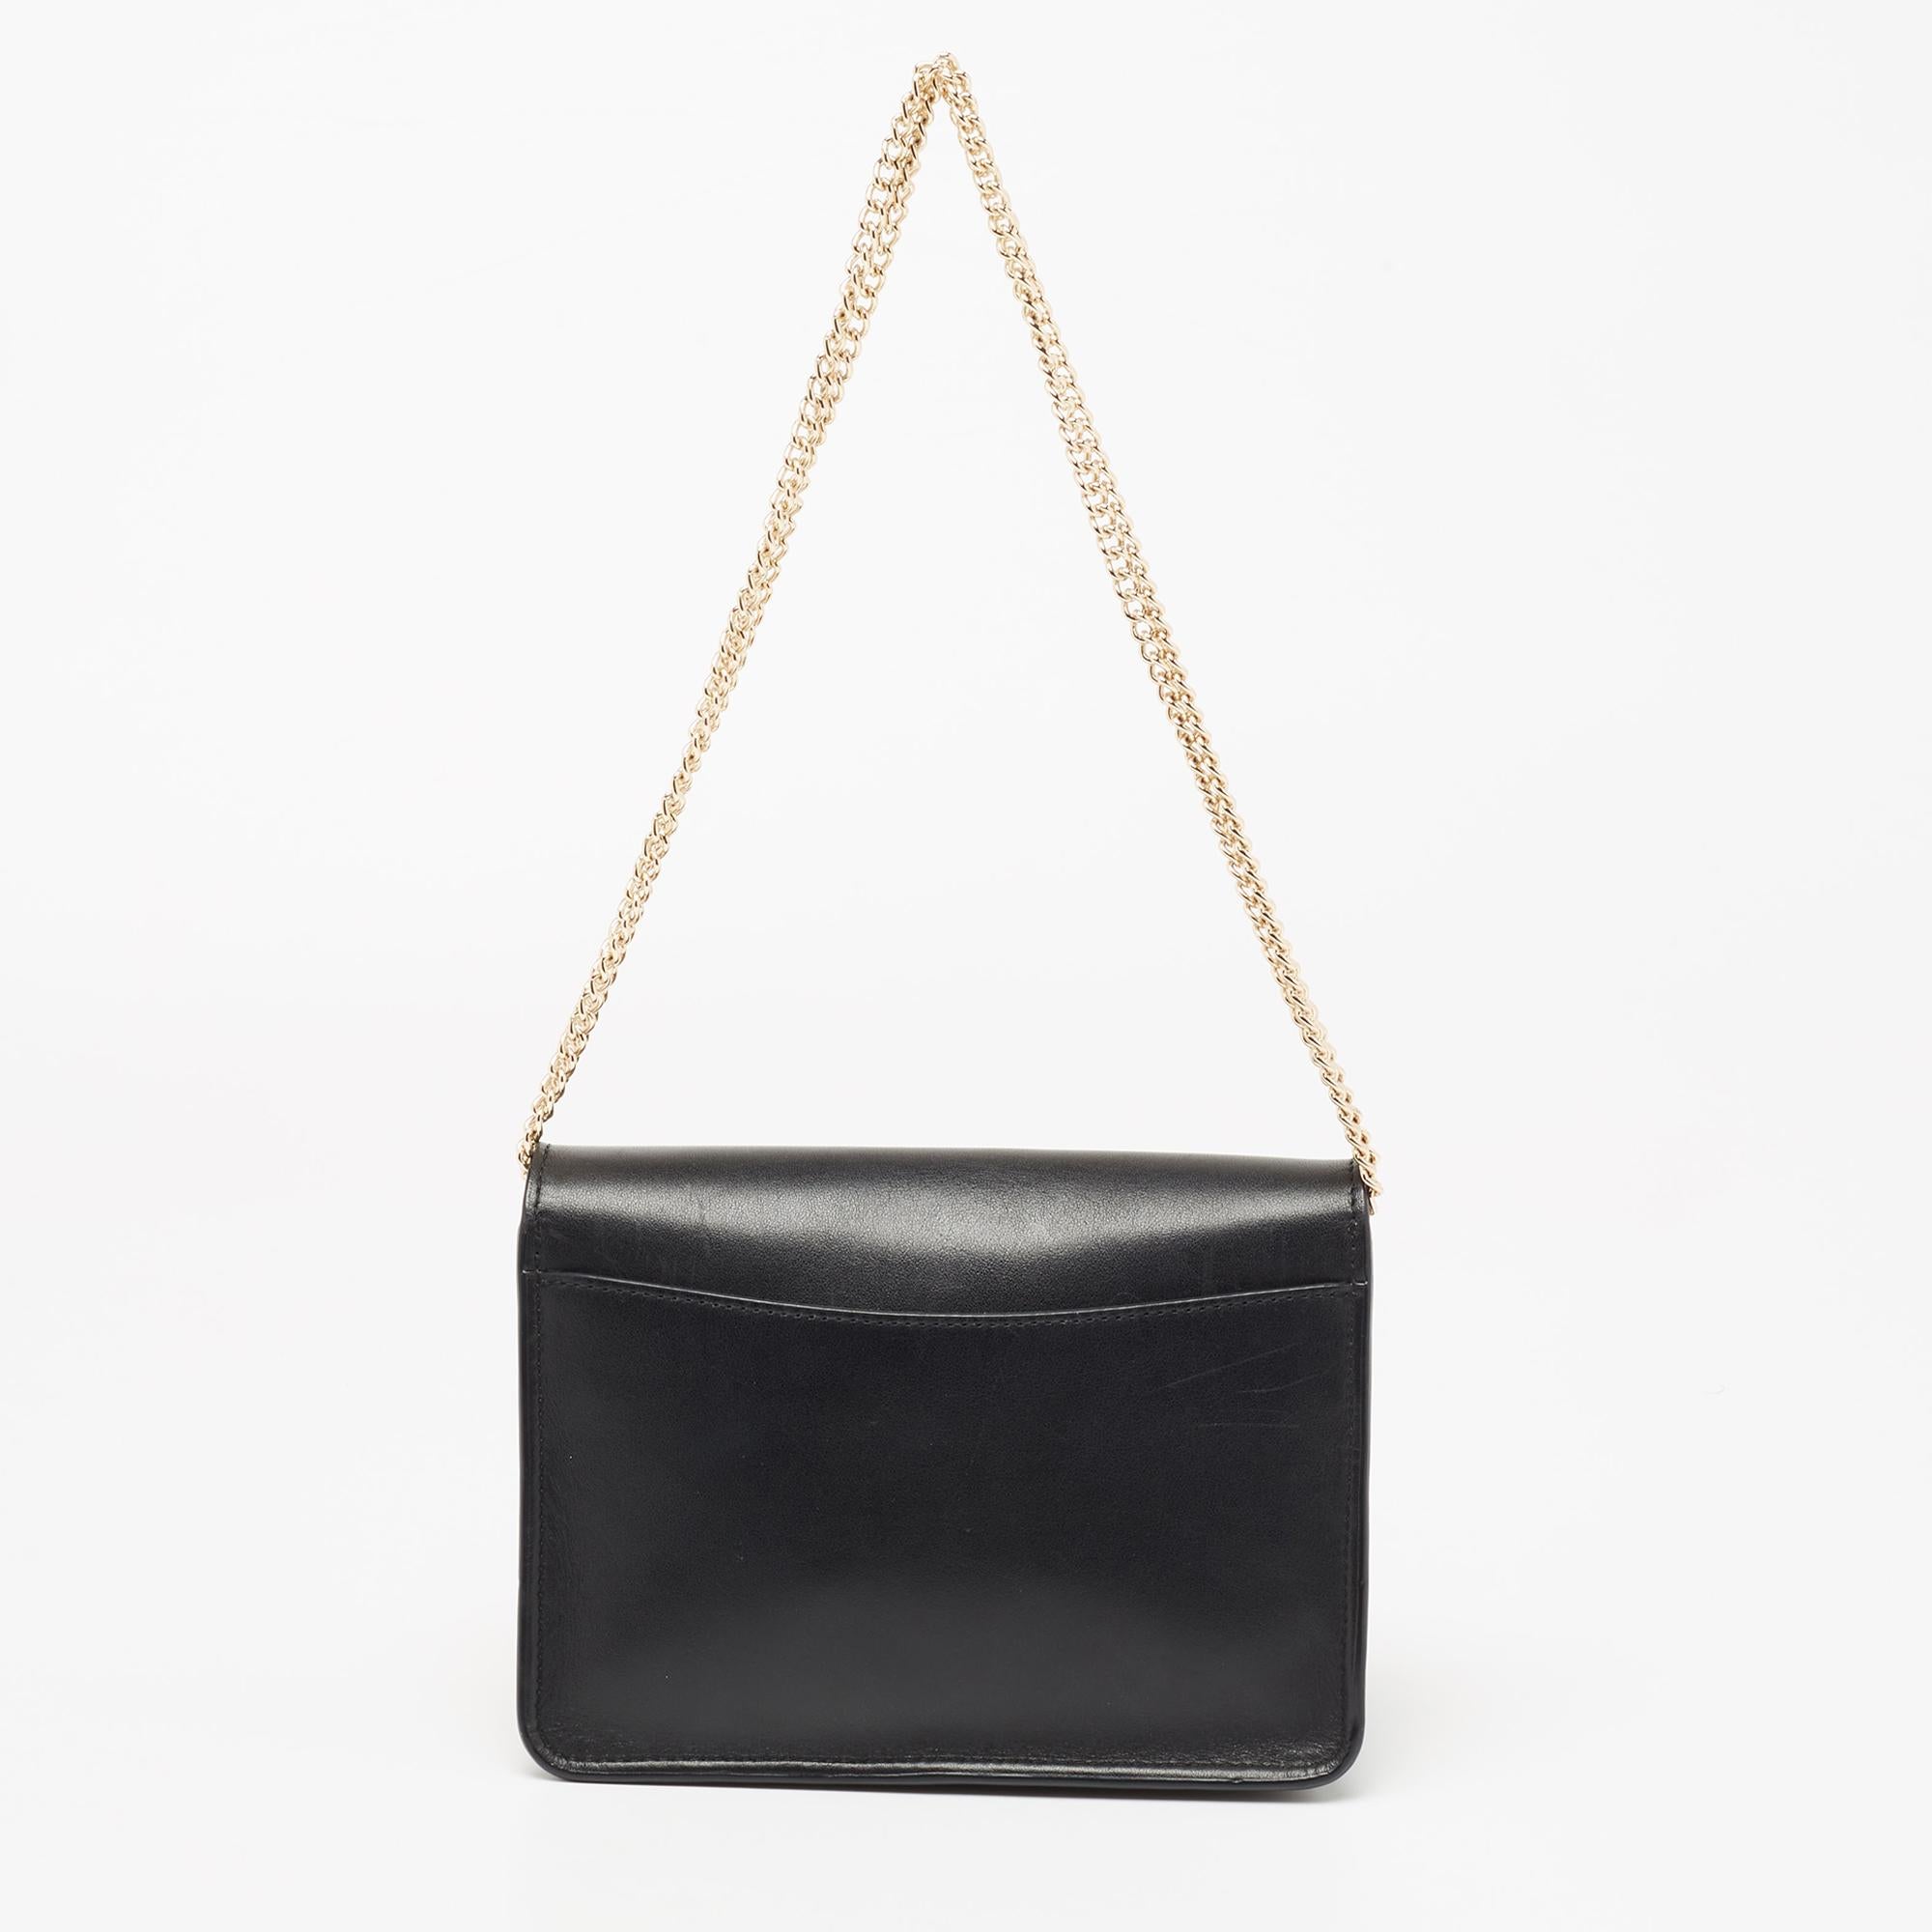 Step out in style carrying this crossbody bag from Coach. It is crafted from leather and flaunts a turn-lock on the front. The bag has an Alcantara-lined compartment and a shoulder chain.
